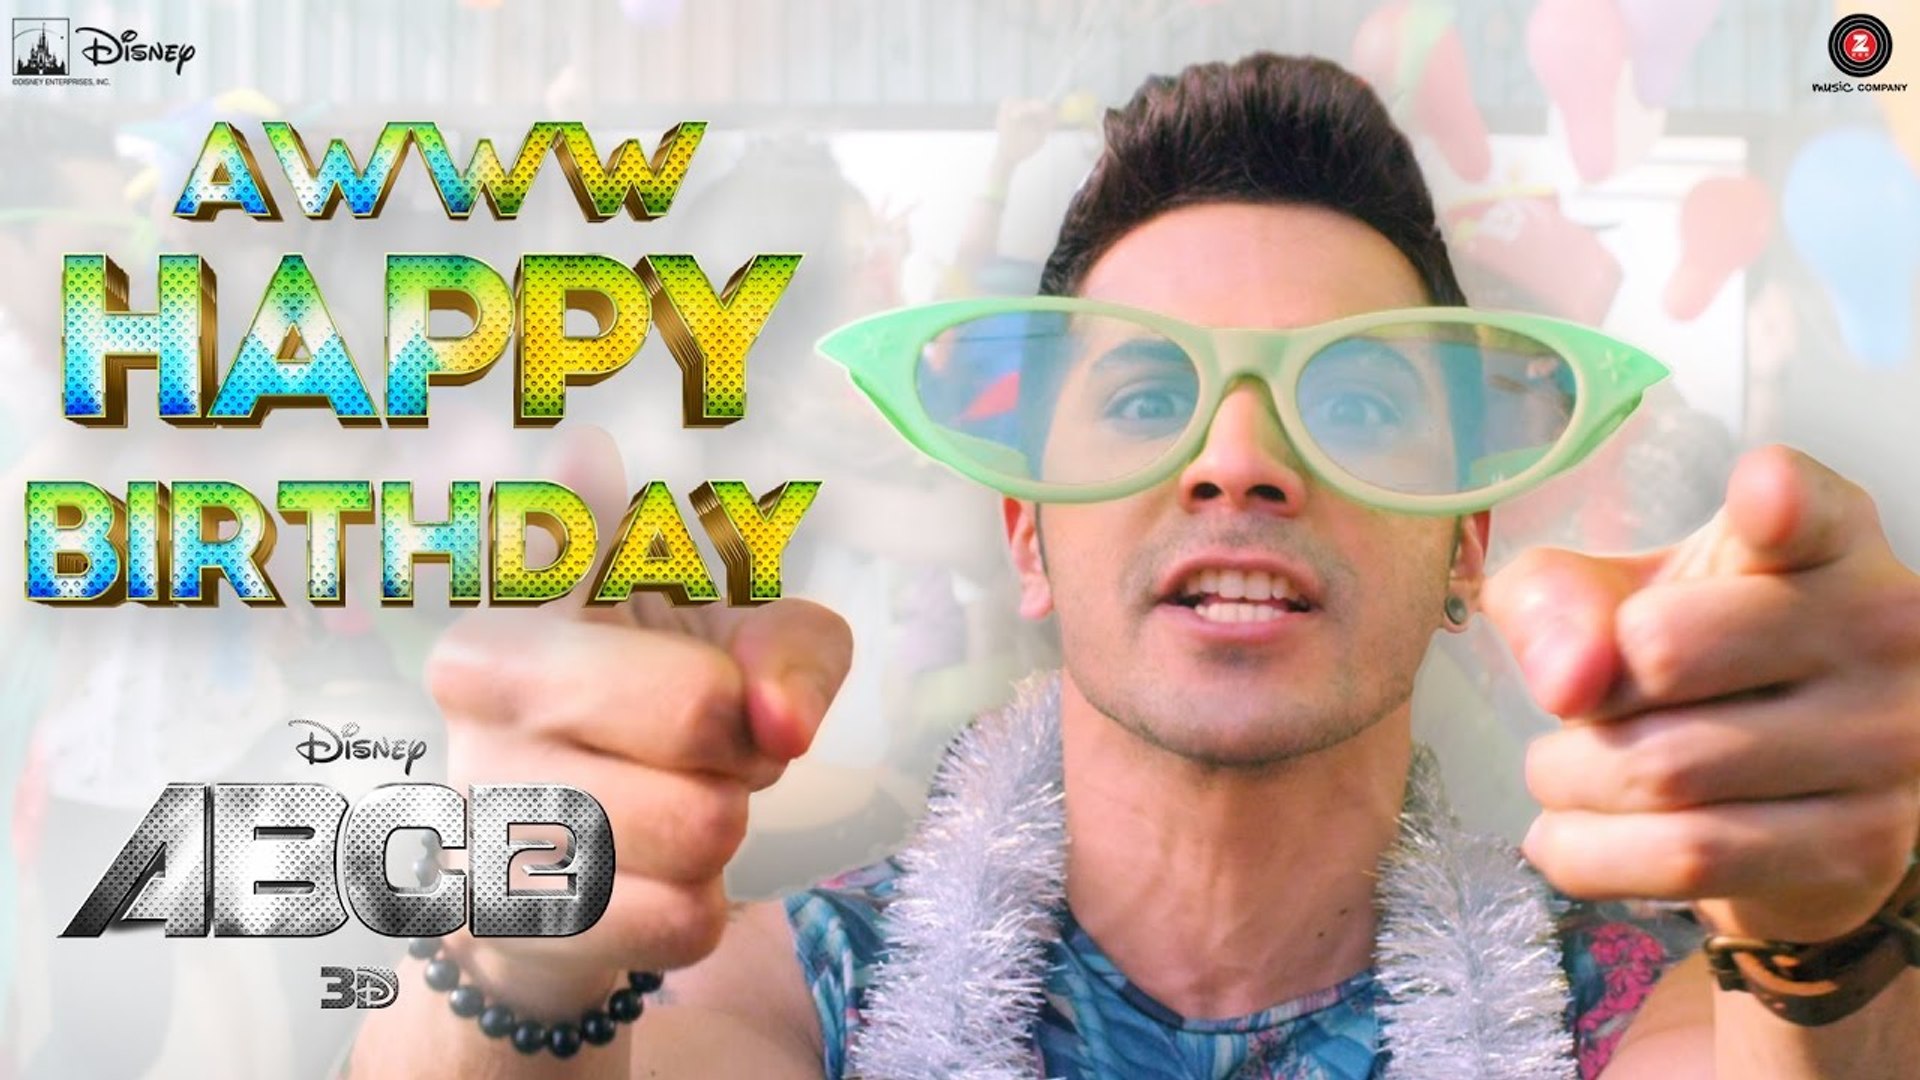 Latest Video Song - Aww Tera Happy Bday - HD(Full Song) - ABCD 2 - Varun  Dhawan - Shraddha Kapoor - Sachin - Jigar - D. Soldierz - PK hungama mASTI  Official Channel - video Dailymotion